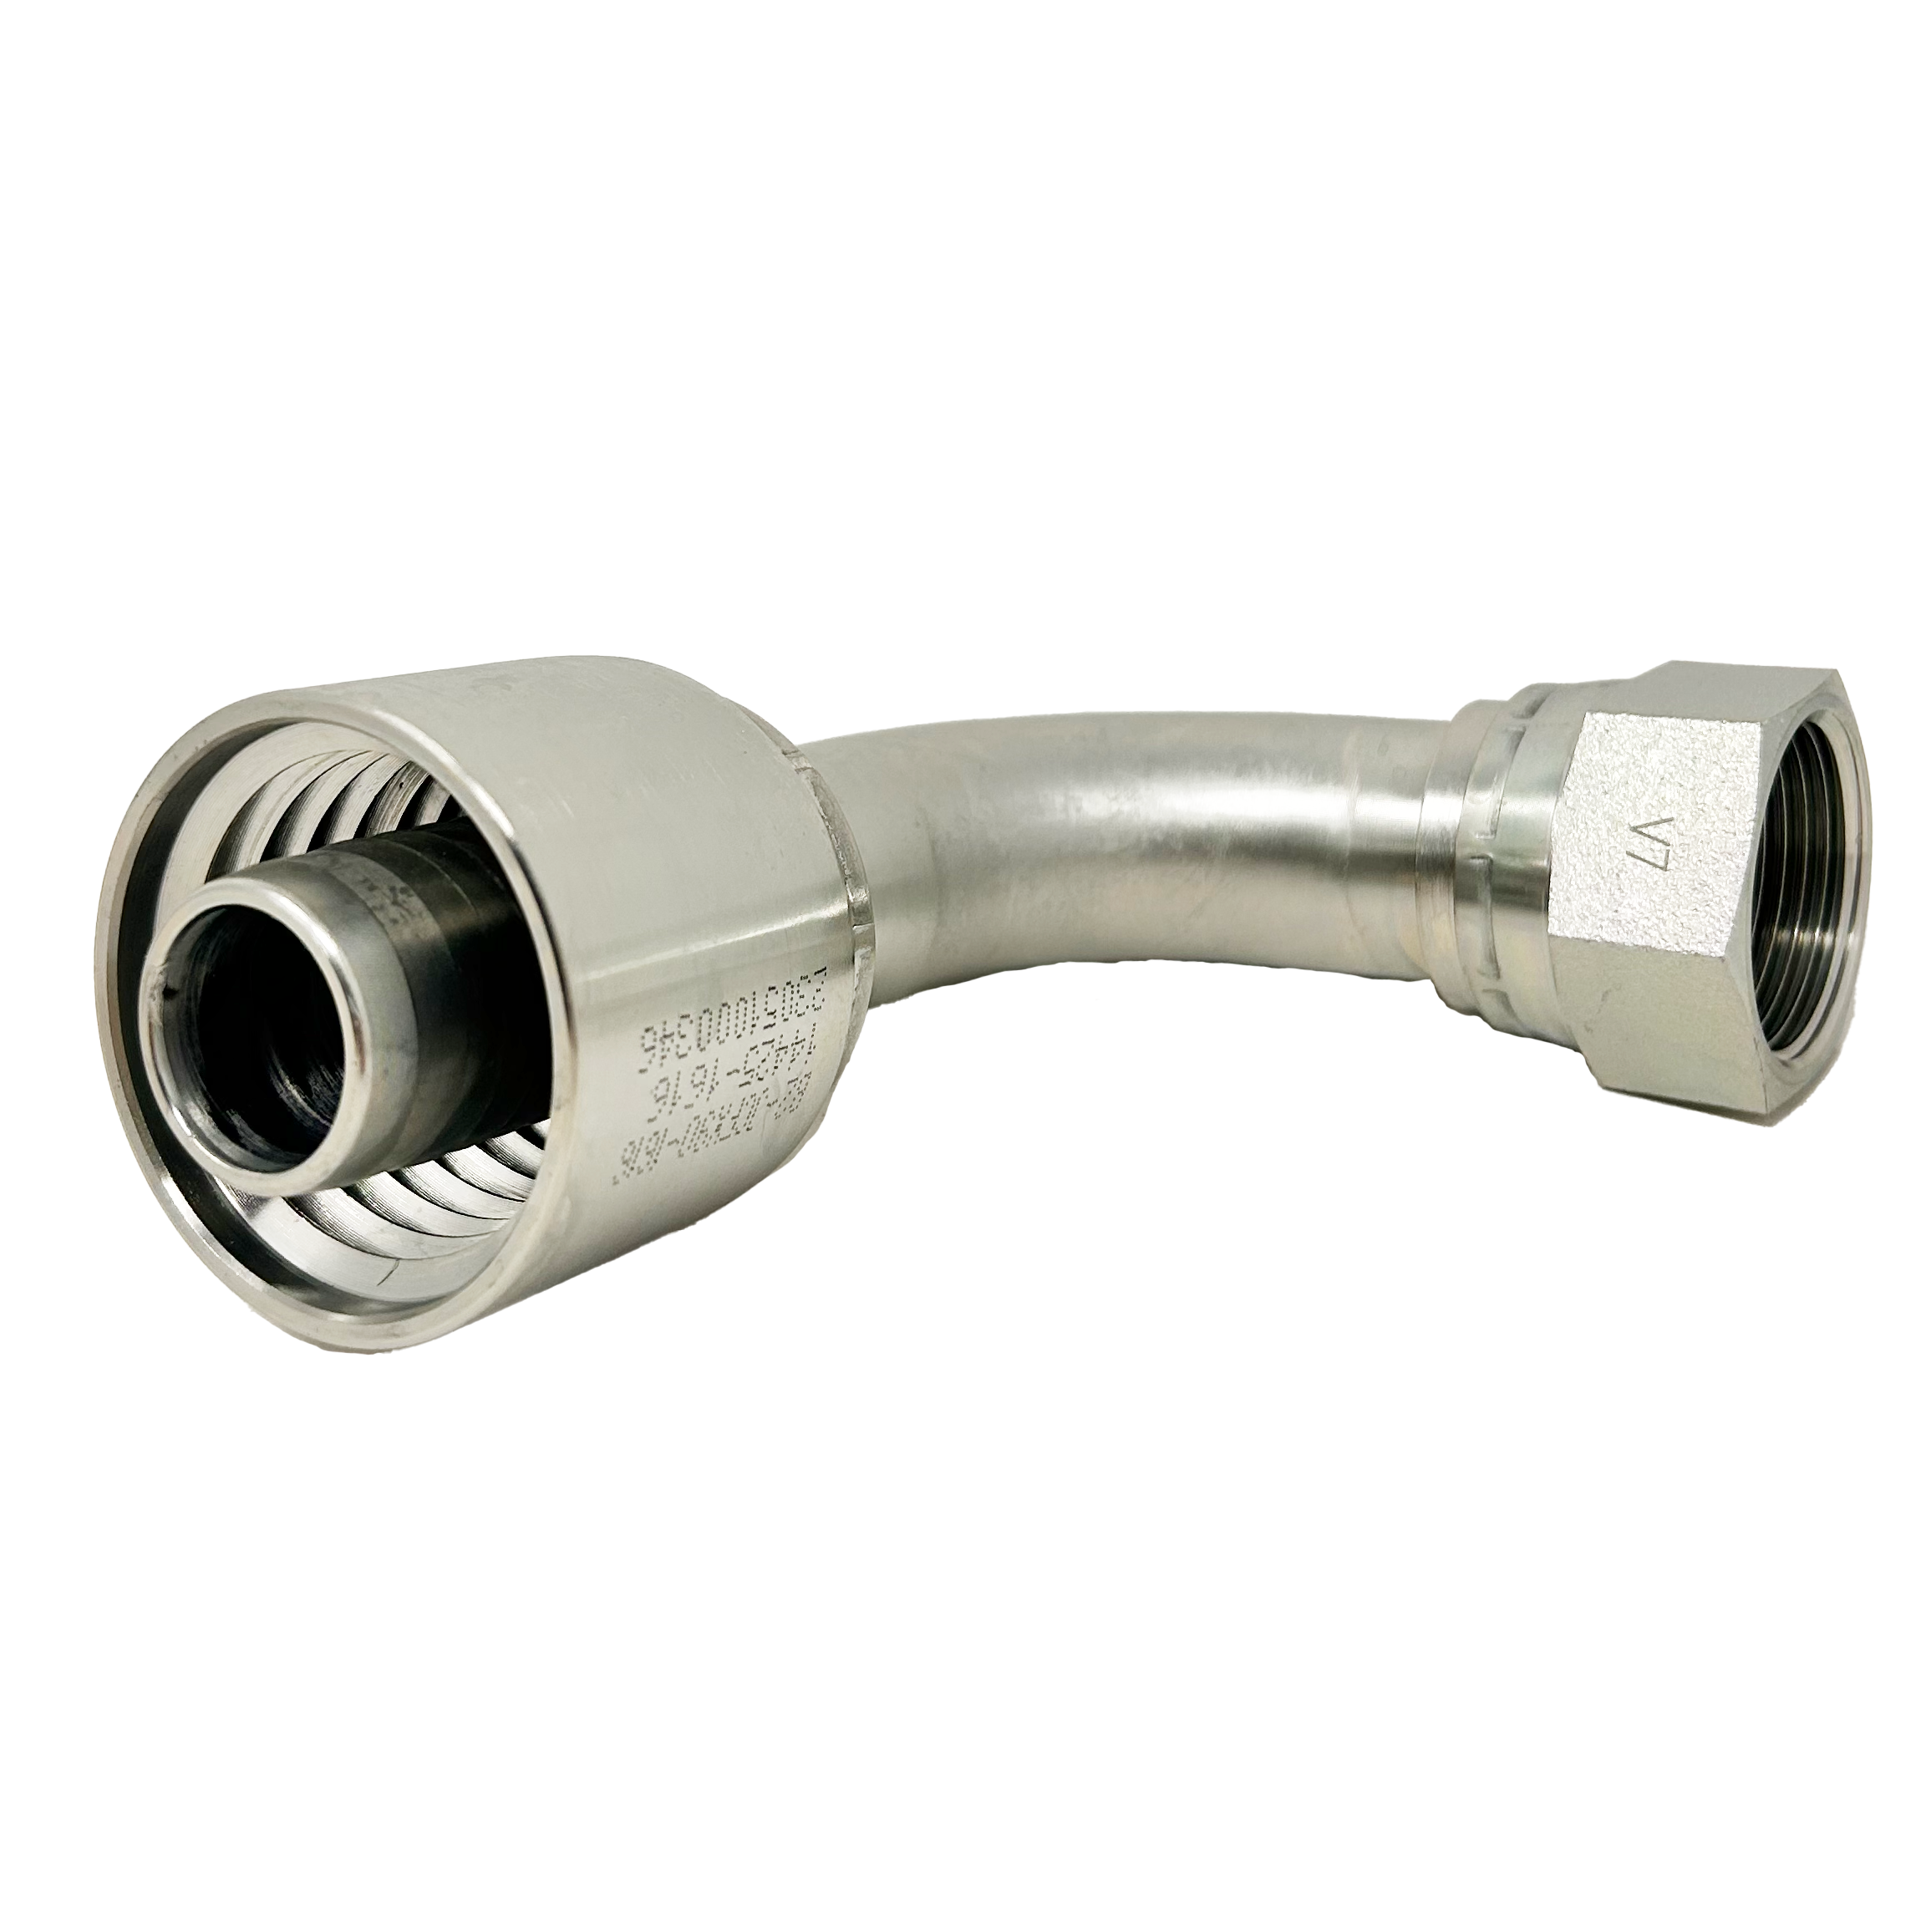 B2-JCFX90-1212S: Continental Hose Fitting, 0.75 (3/4") Hose ID x 1-1/16-12 Female JIC, 90-Degree Swivel Connection